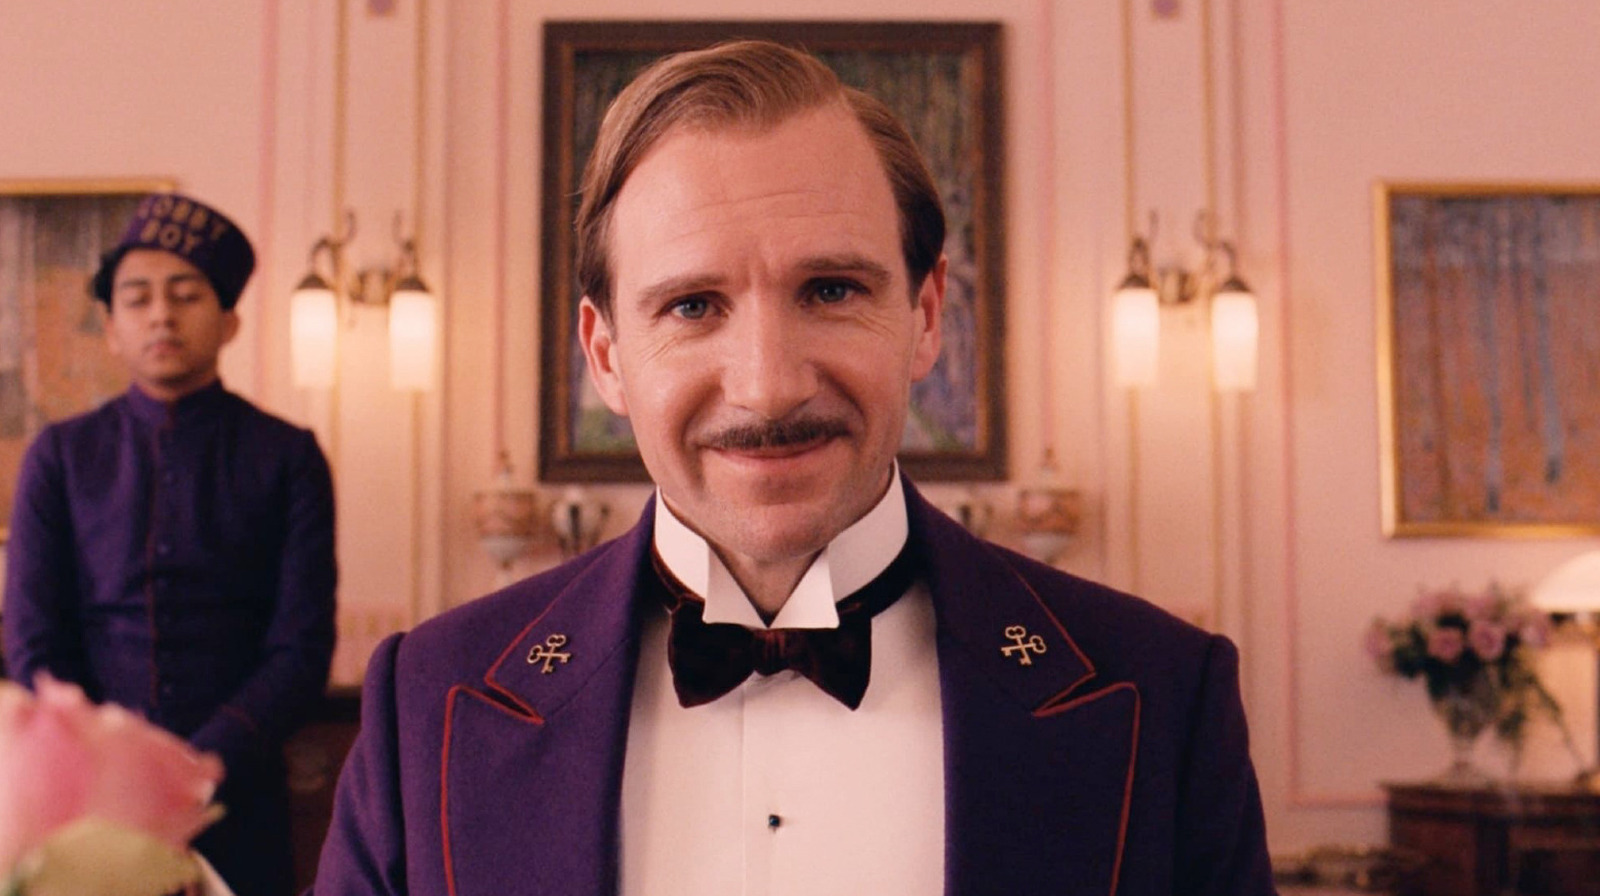 The Grand Budapest Hotel Hit Close To Home For Ralph Fiennes